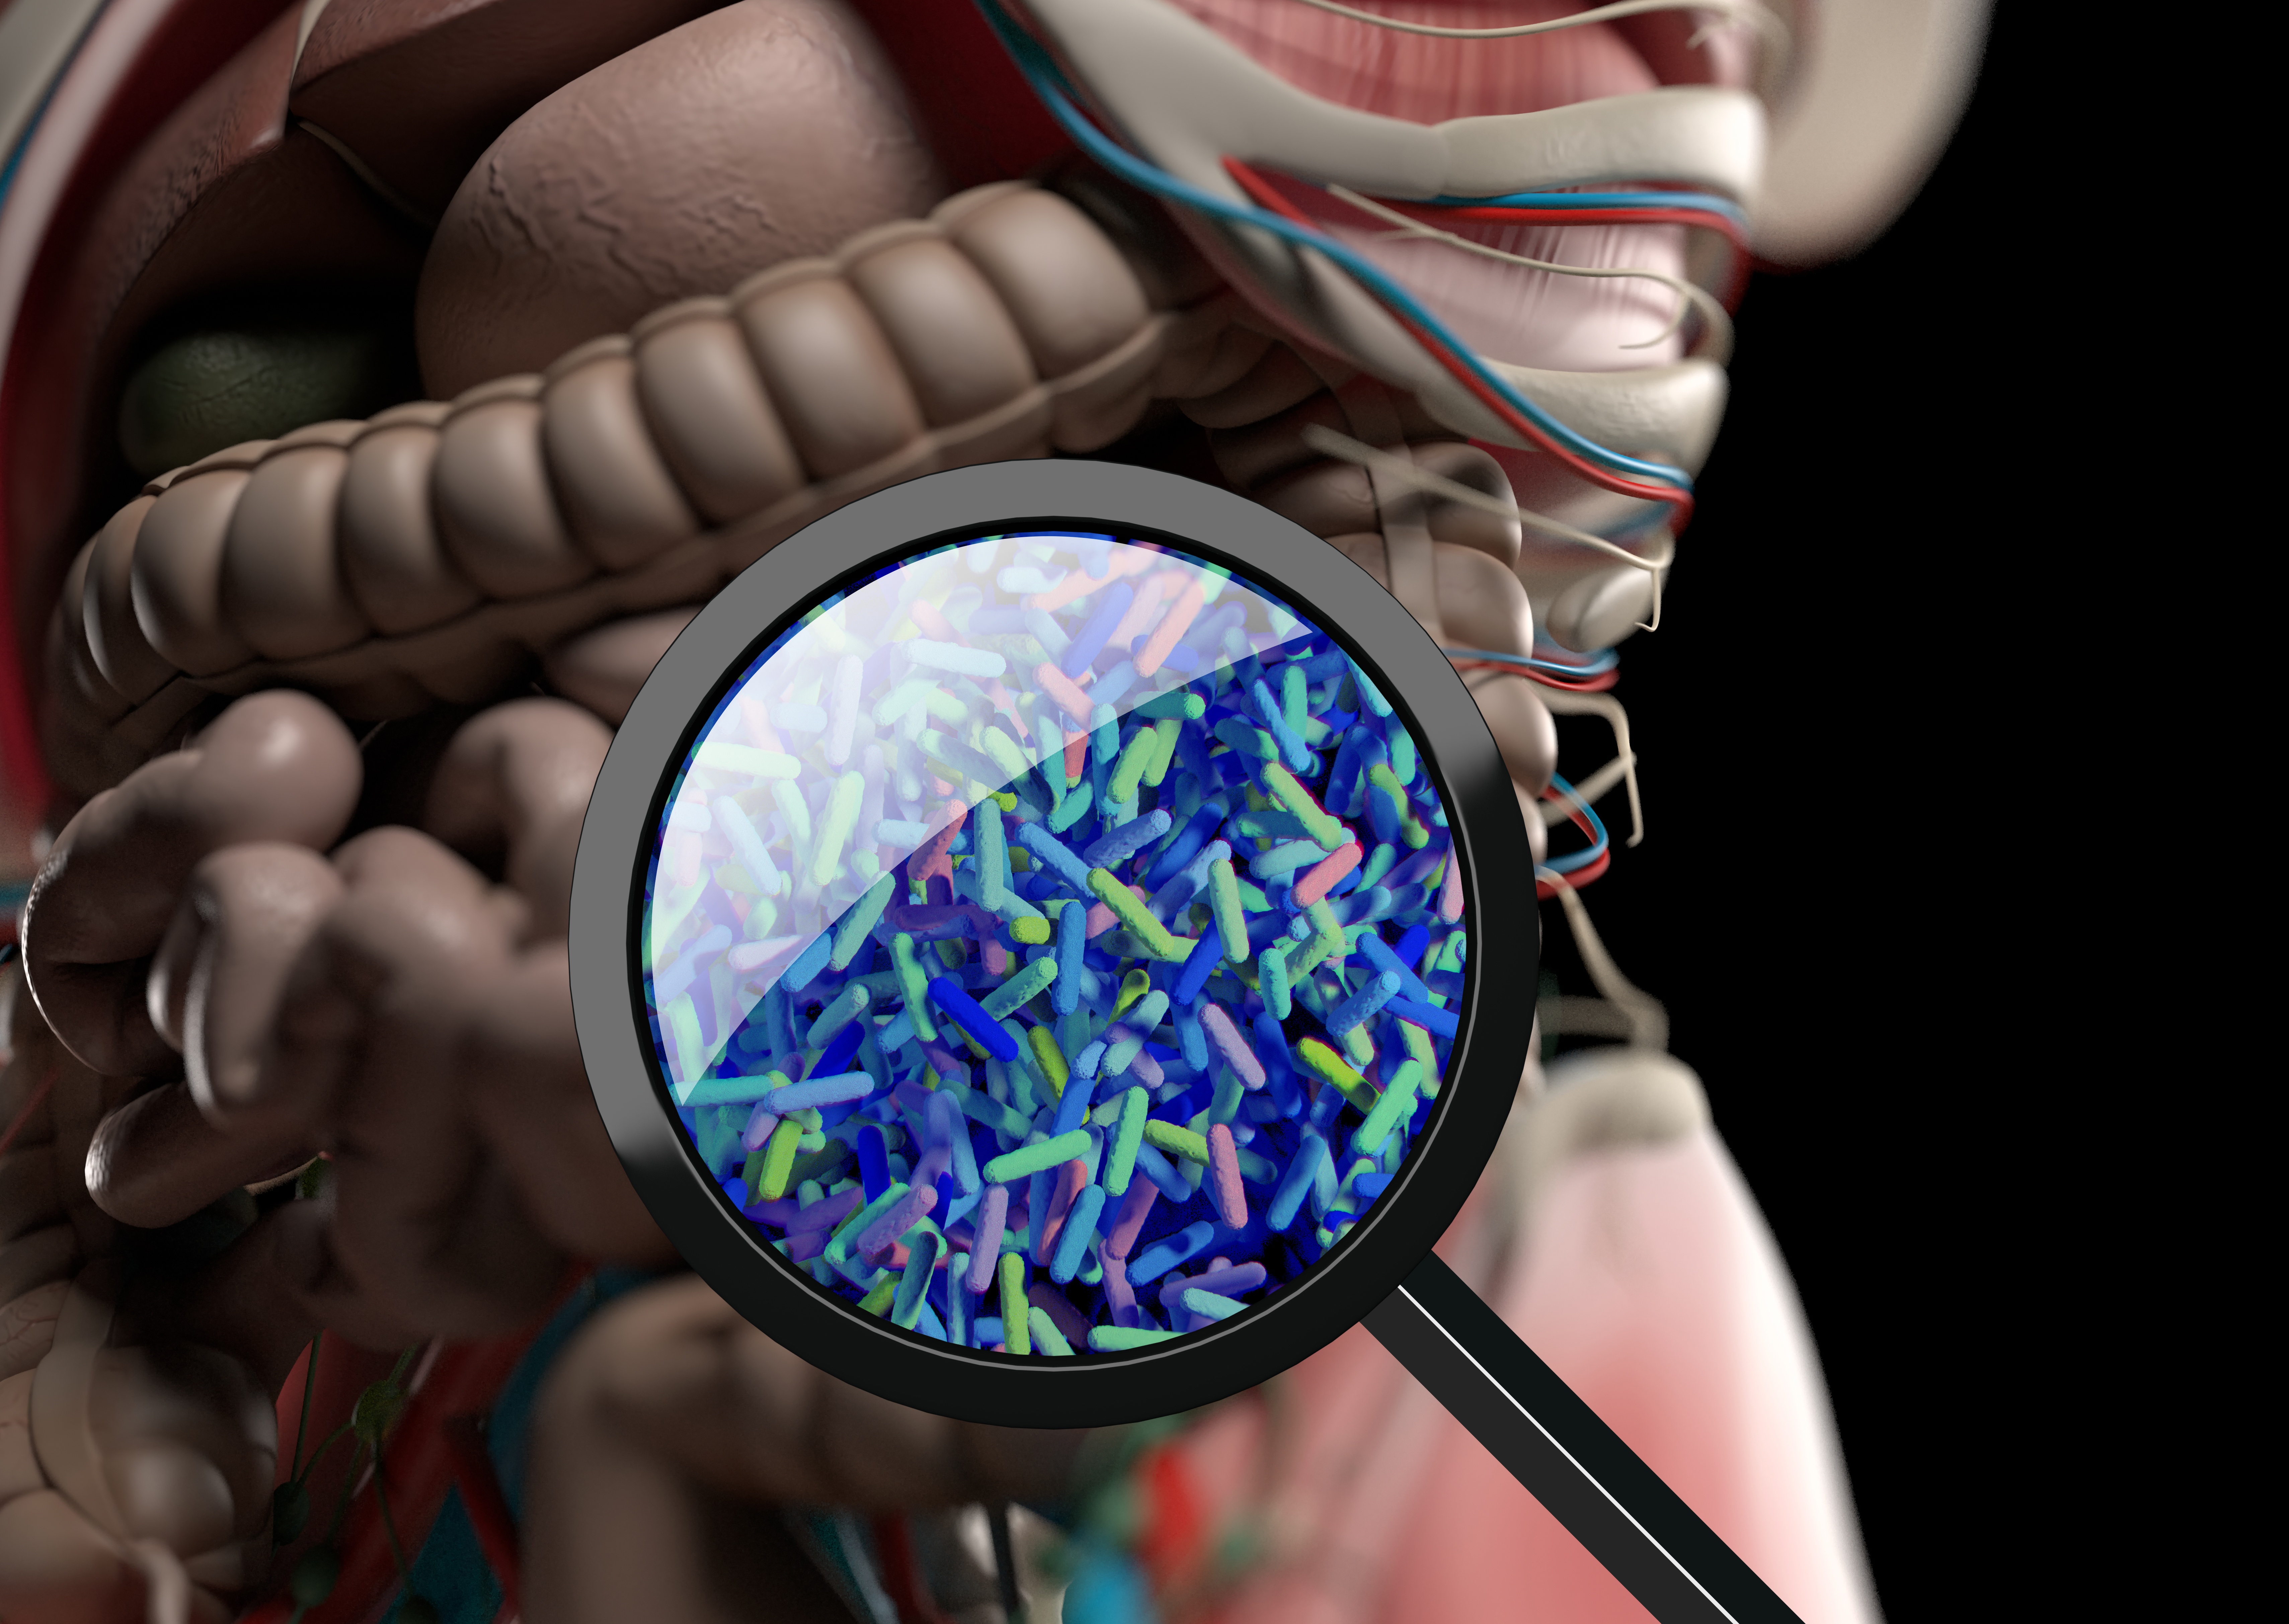 The Role of Gut Microbiota and Implications for IBD